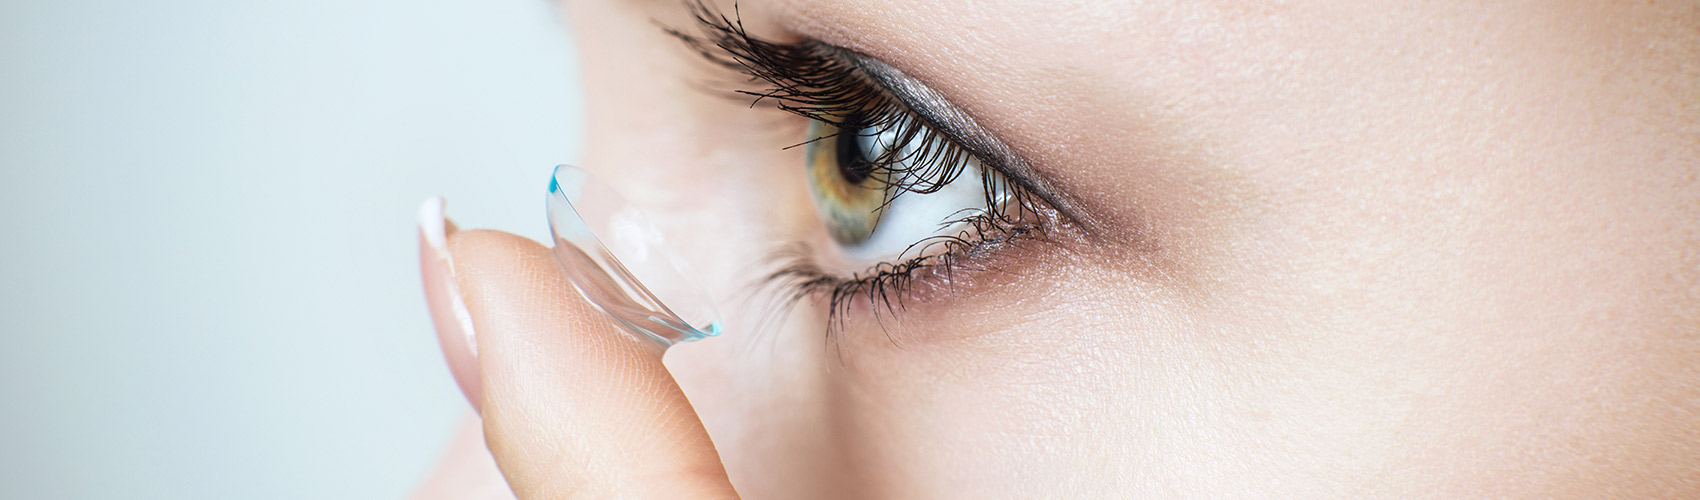 woman inserting contact lens